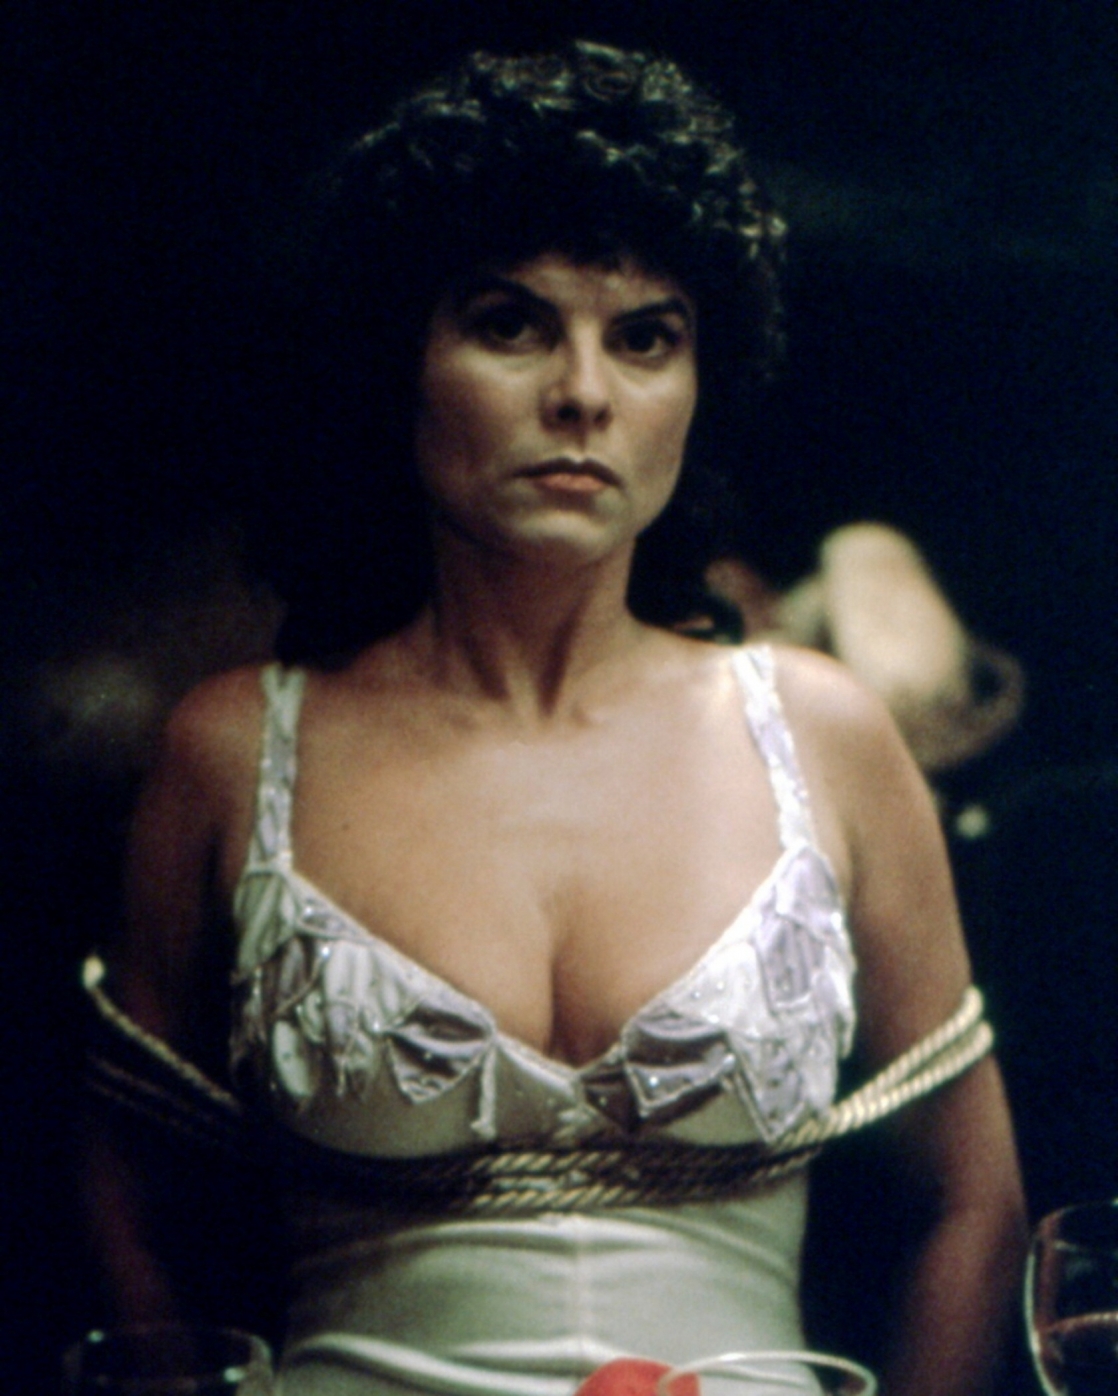 Adrienne Barbeau with an angry face while tied with a rope, and wearing a white sleeveless dress in a movie scene from Swamp Thing, a 1982 American superhero horror film.